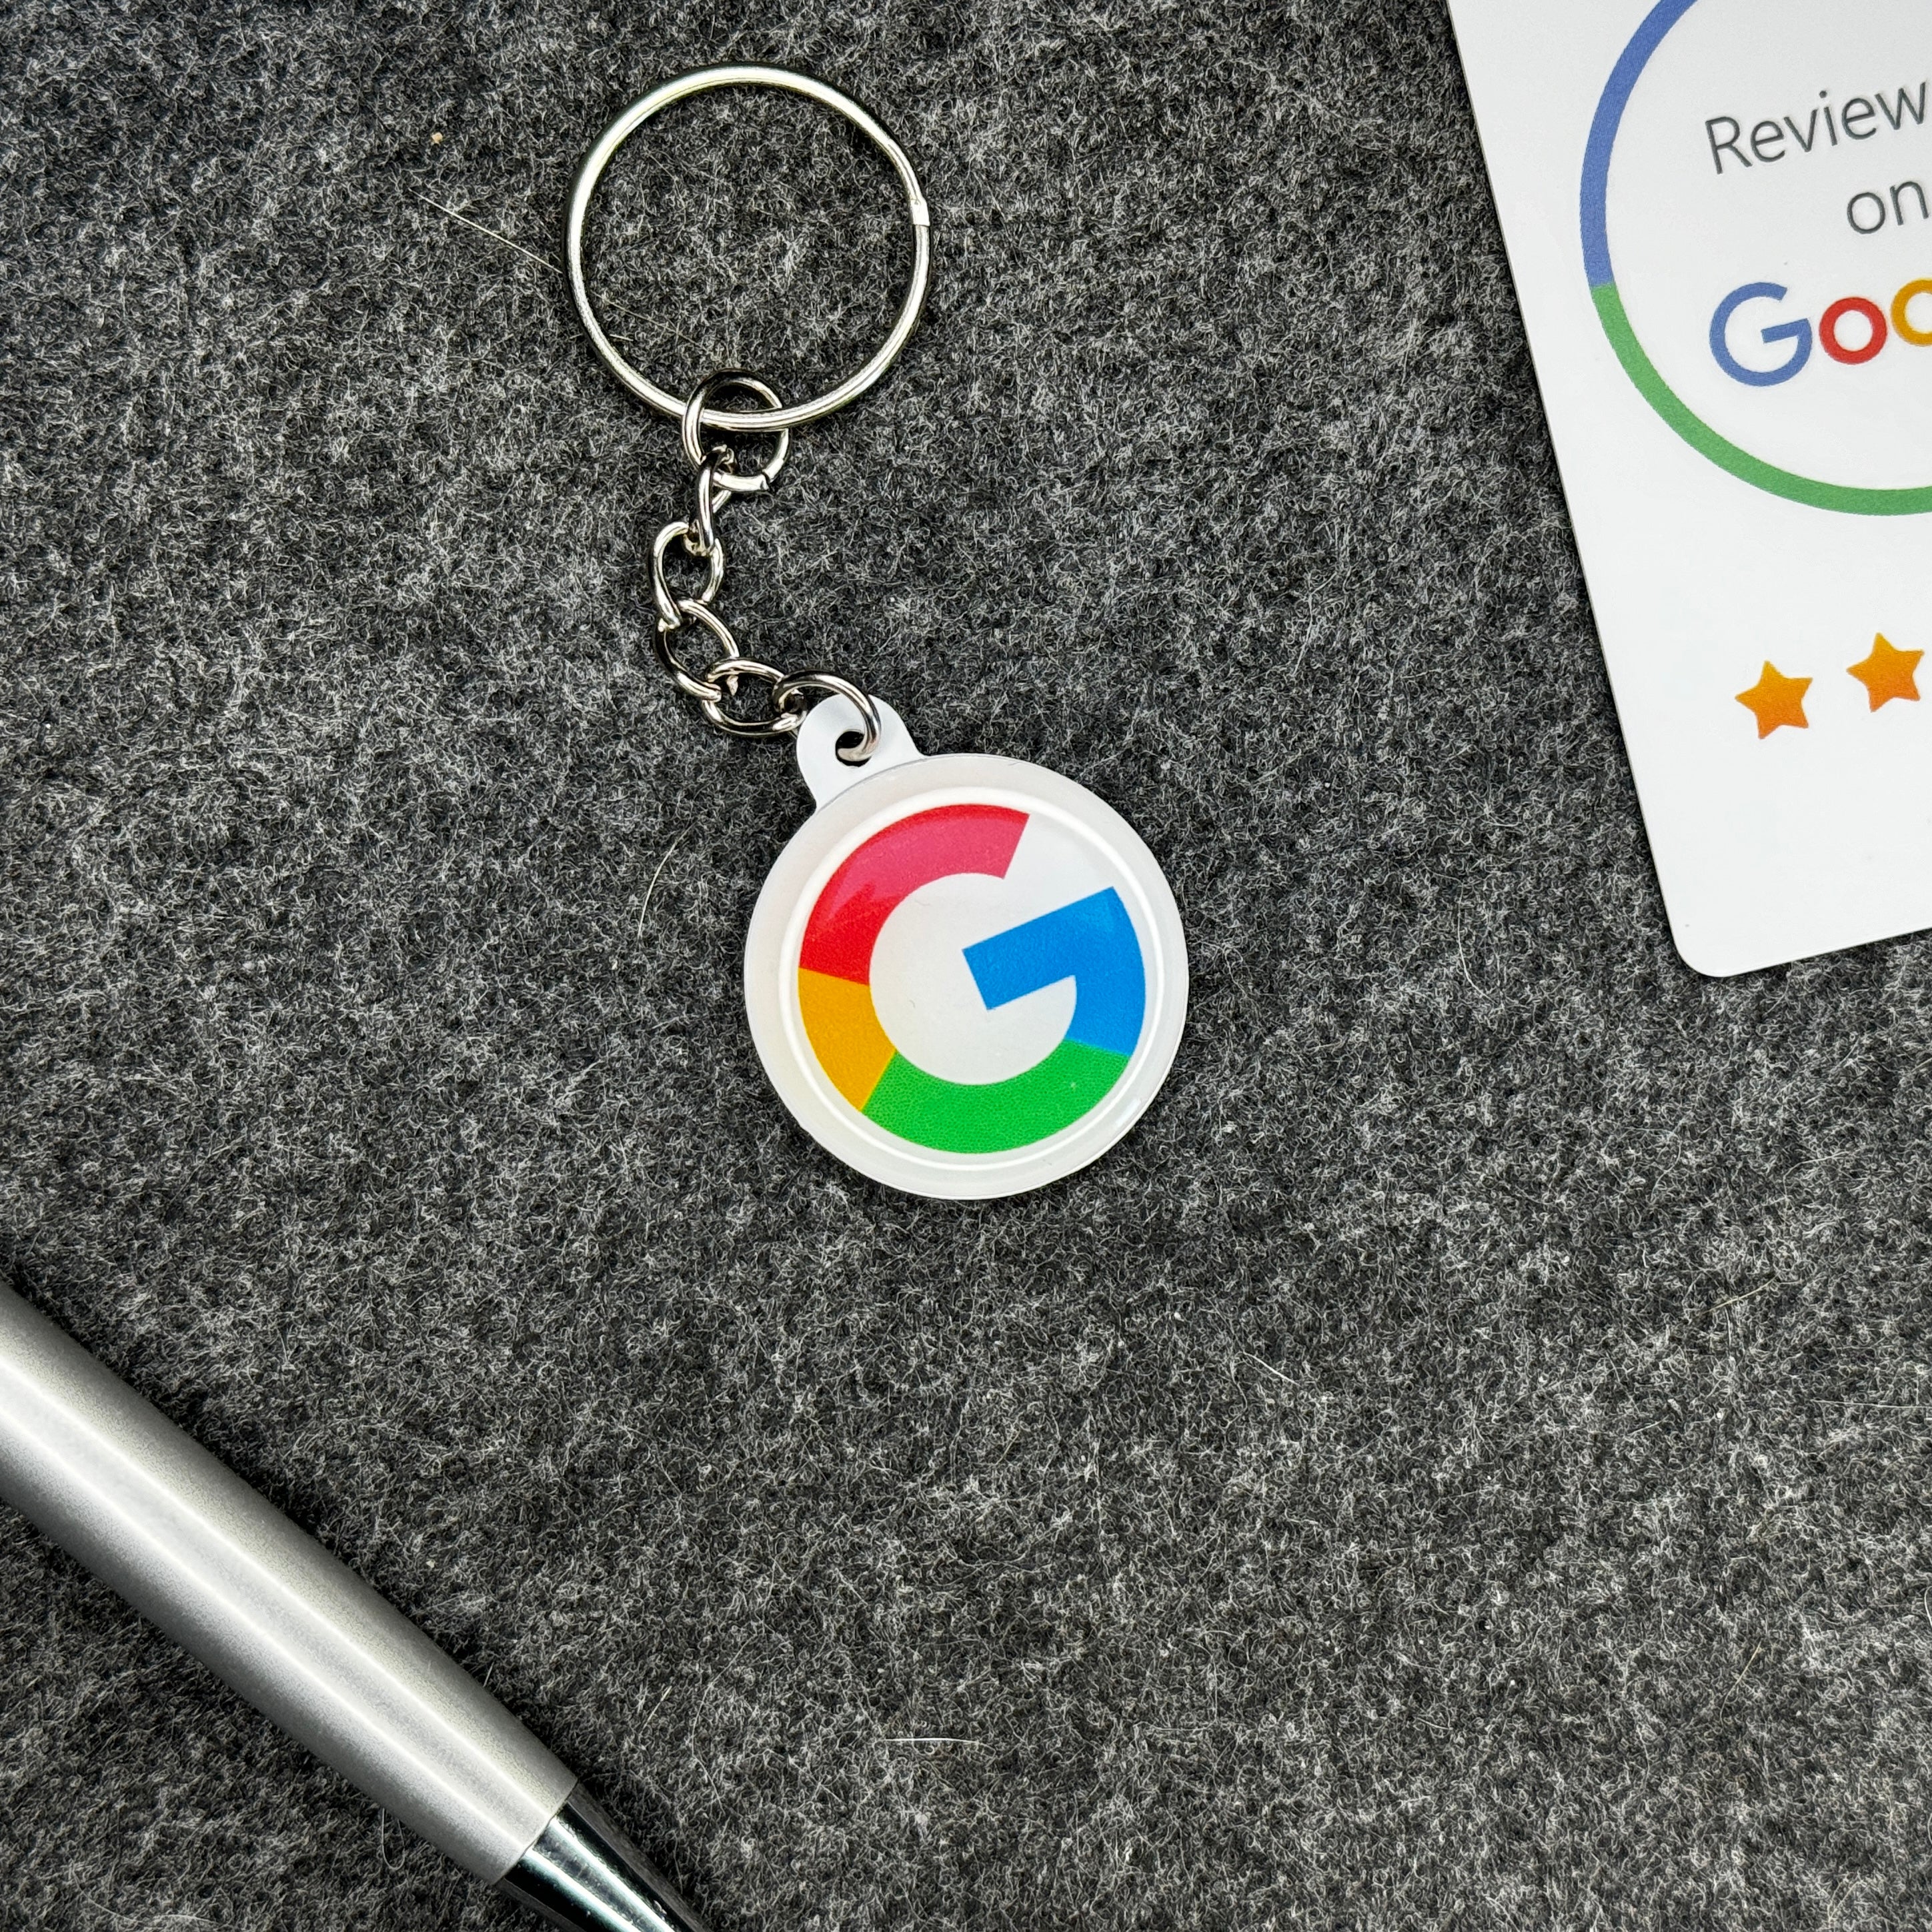 Google Review Keychain